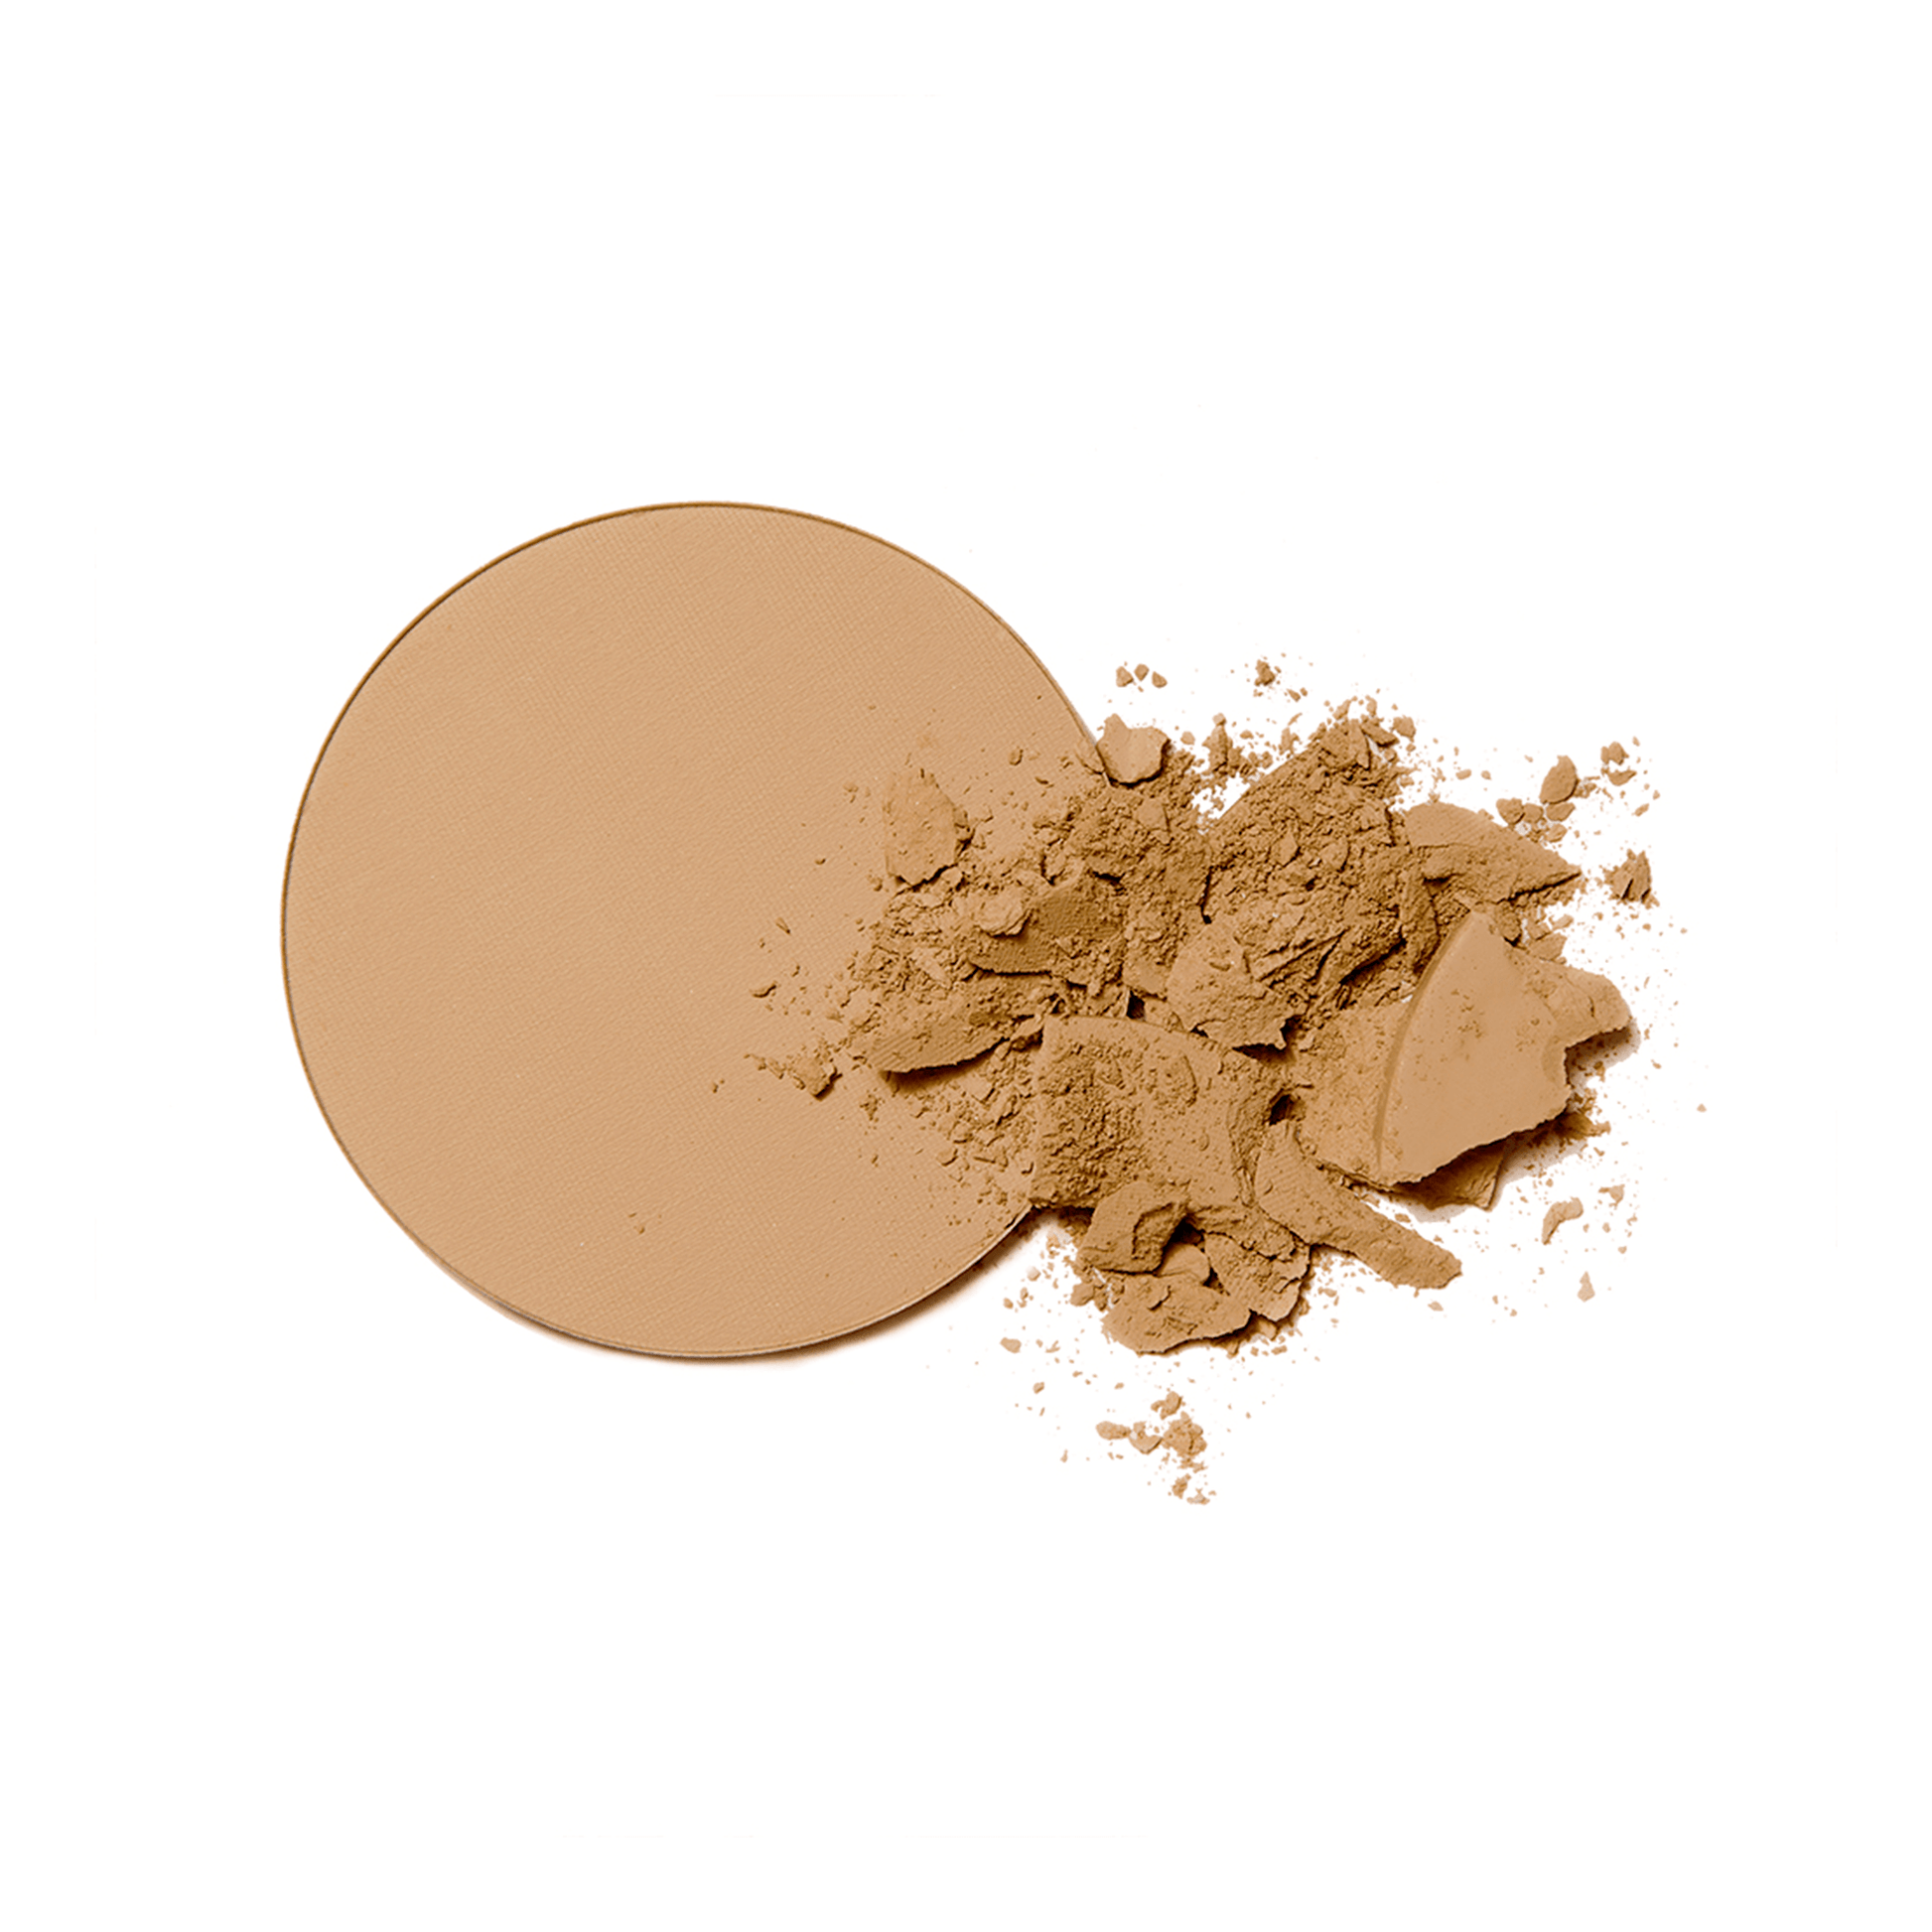 Baked Mineral Foundation (Inspiration) | INIKA Organic | Swatch